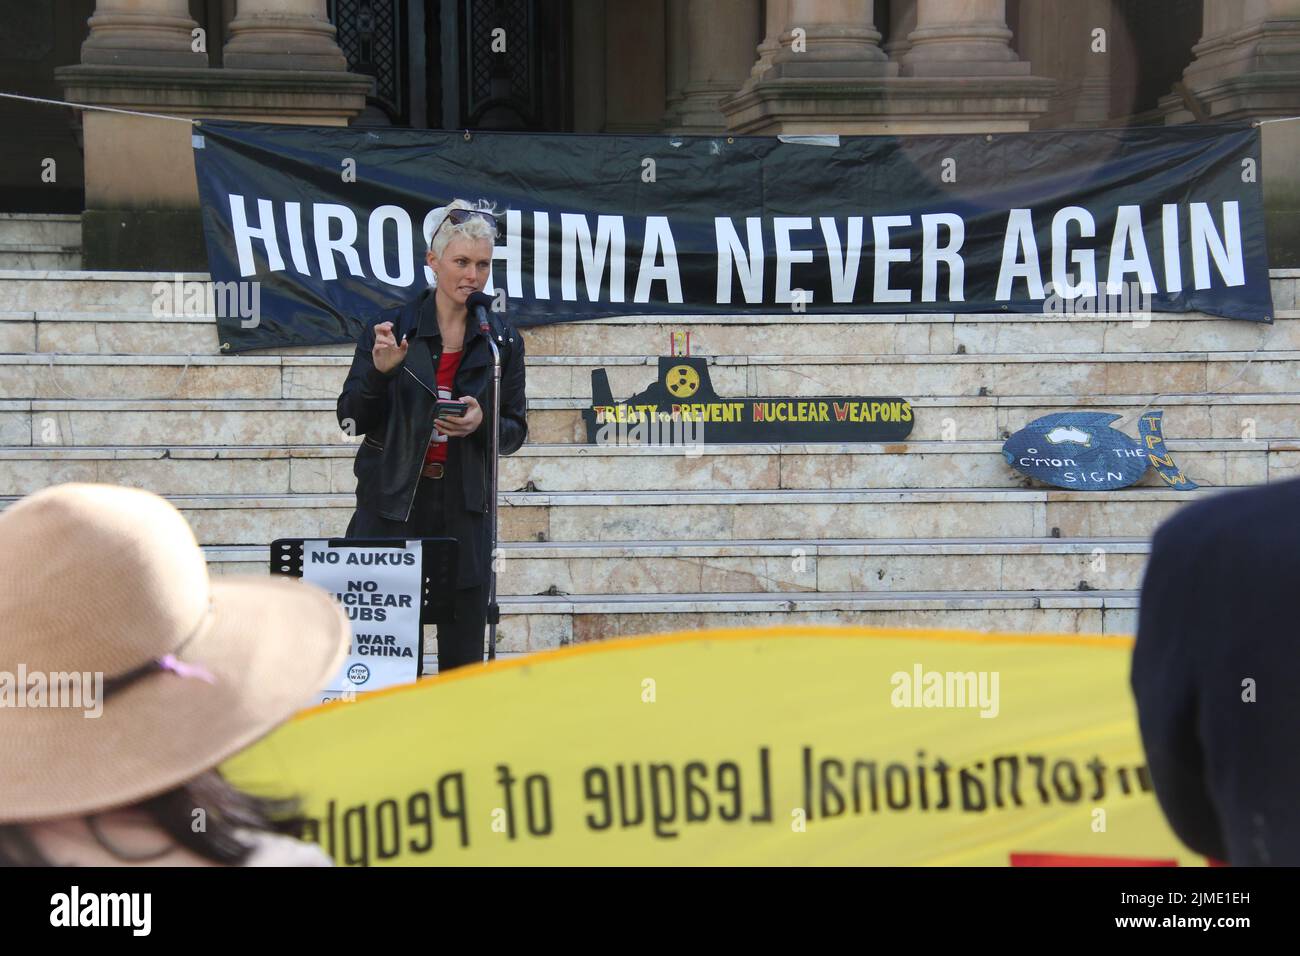 Sydney, Australia. 6th August 2022. A rally outside Sydney Town Hall at 2pm commemorated the US dropping of nuclear bombs on Hiroshima and Nagasaki in Japan in 1945. Pictured: Gem Romuld (International Campaign to Abolish Nuclear Weapons). Credit: Richard Milnes/Alamy Live News Stock Photo